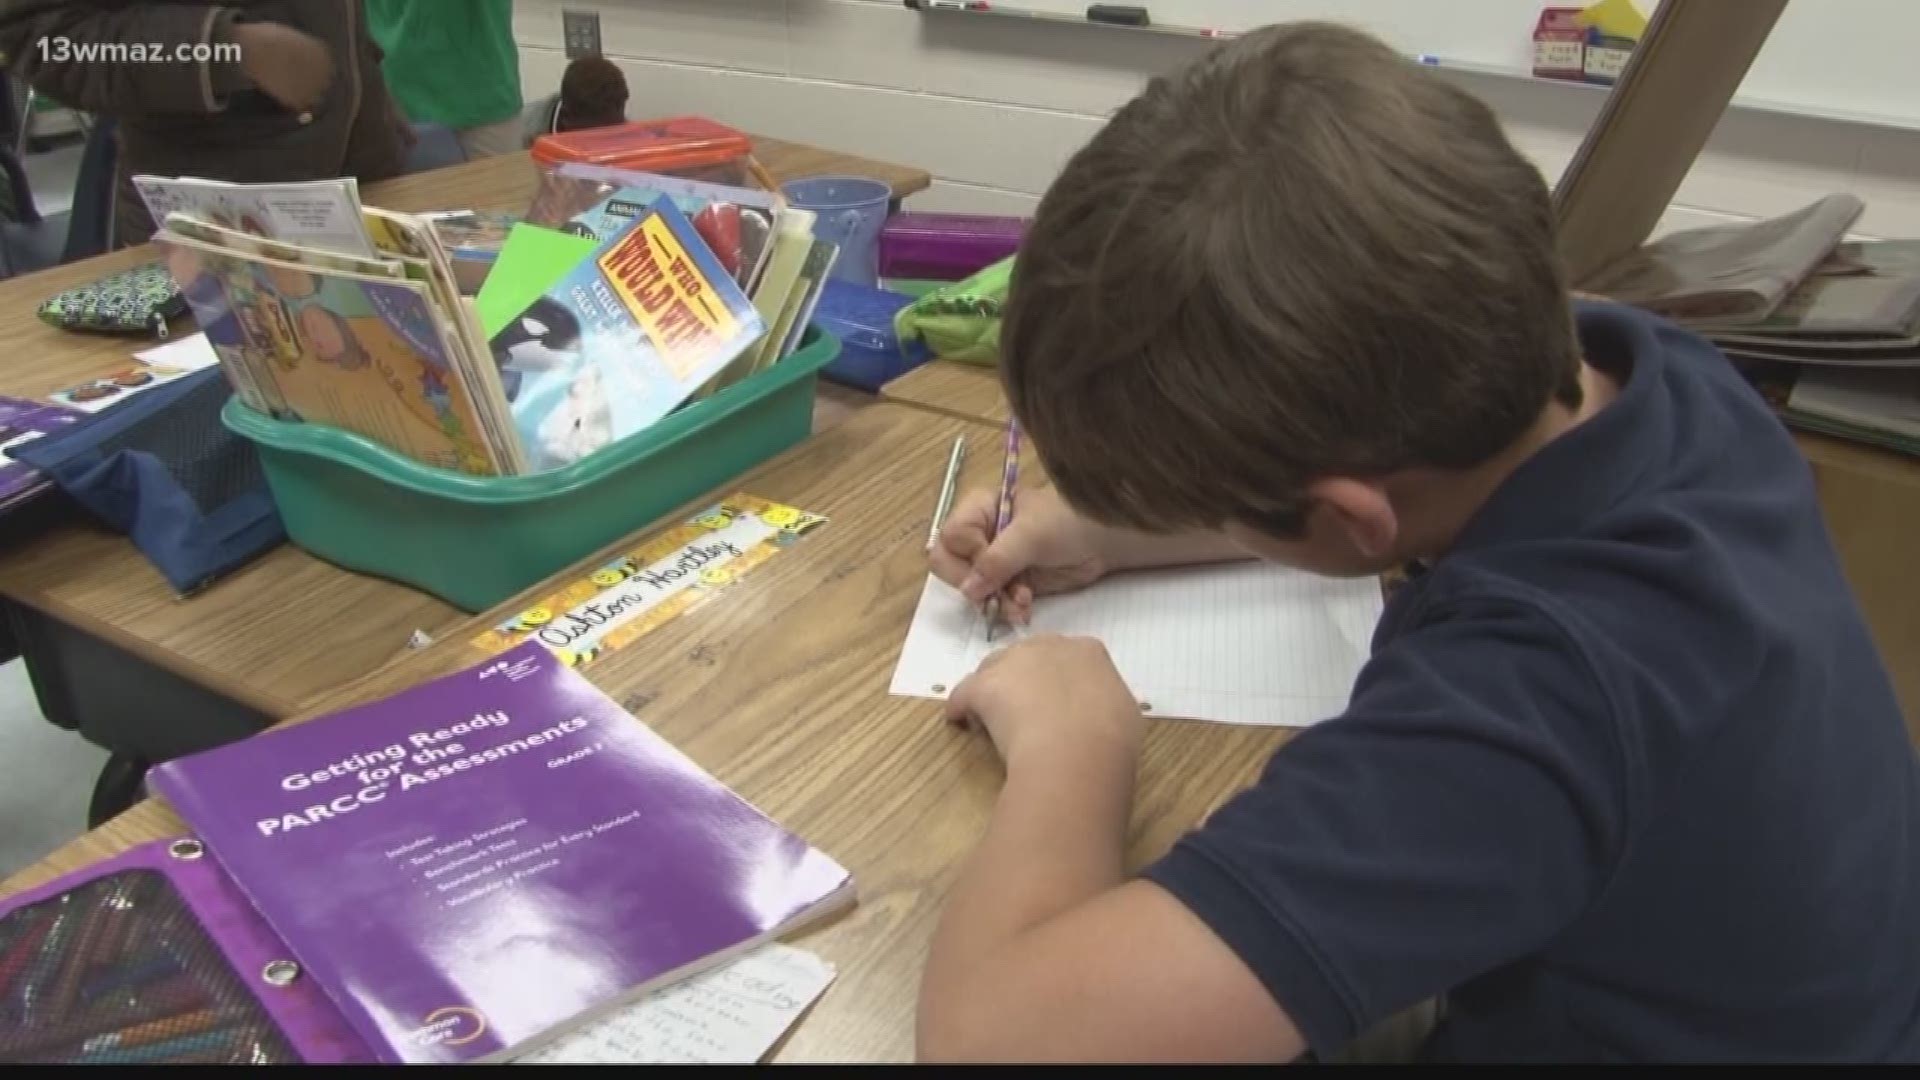 Students and teachers get ready for summer break